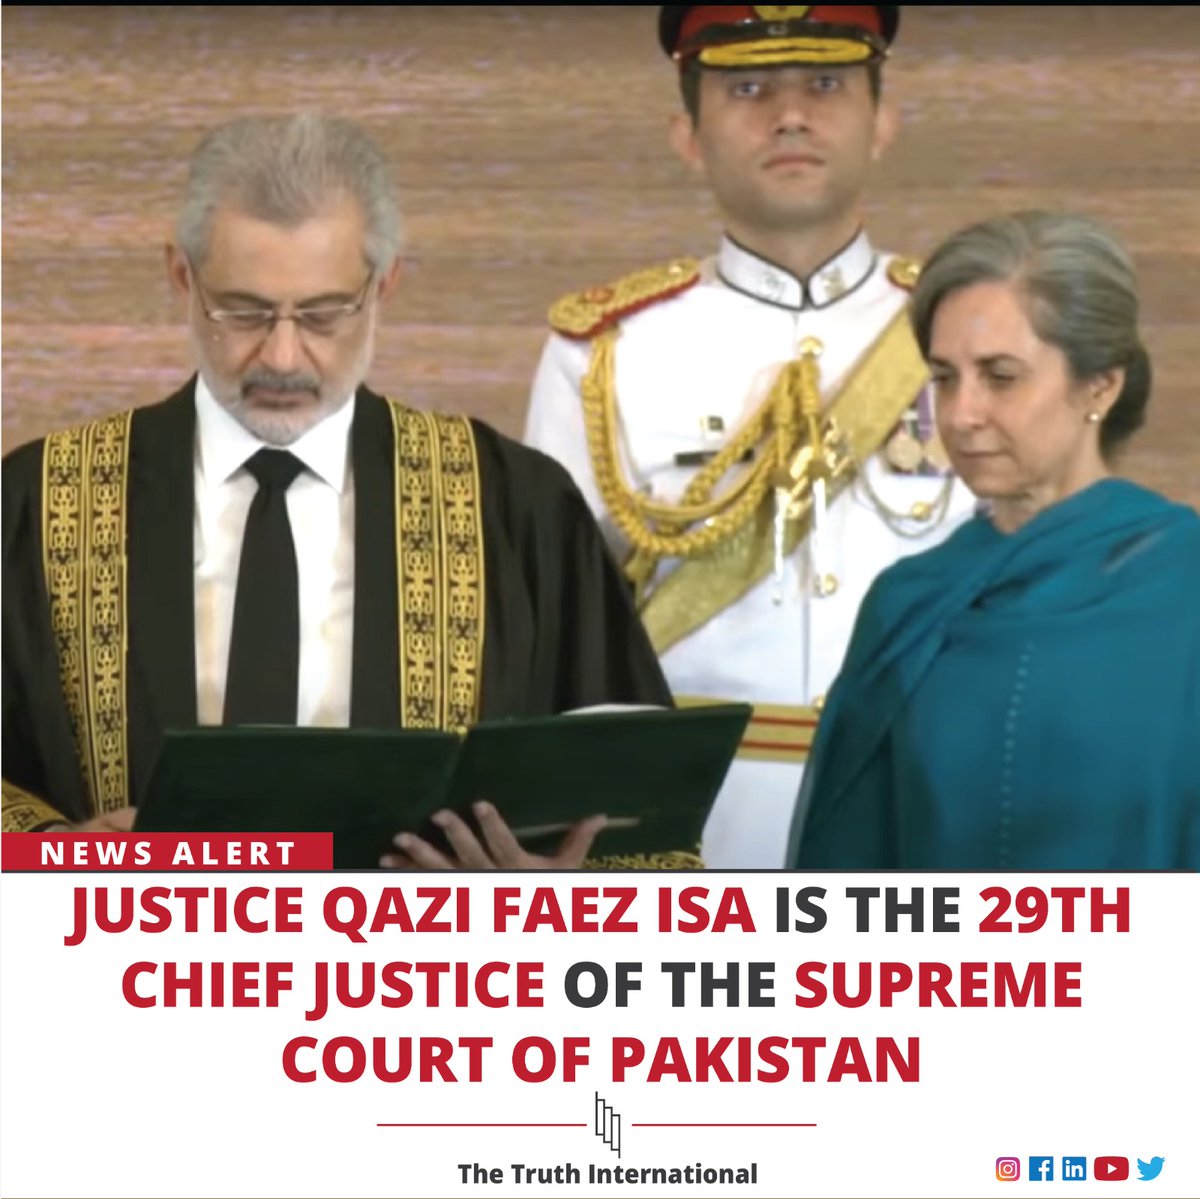 Justice Qazi Faez Isa is the 29th Chief Justice of the Supreme Court of Pakistan.

For details;
thetruthinternational.com 

#justiceqazifaezisa #SupremeCourt #pakistan #tti #thetruthinternational #ttimagazine